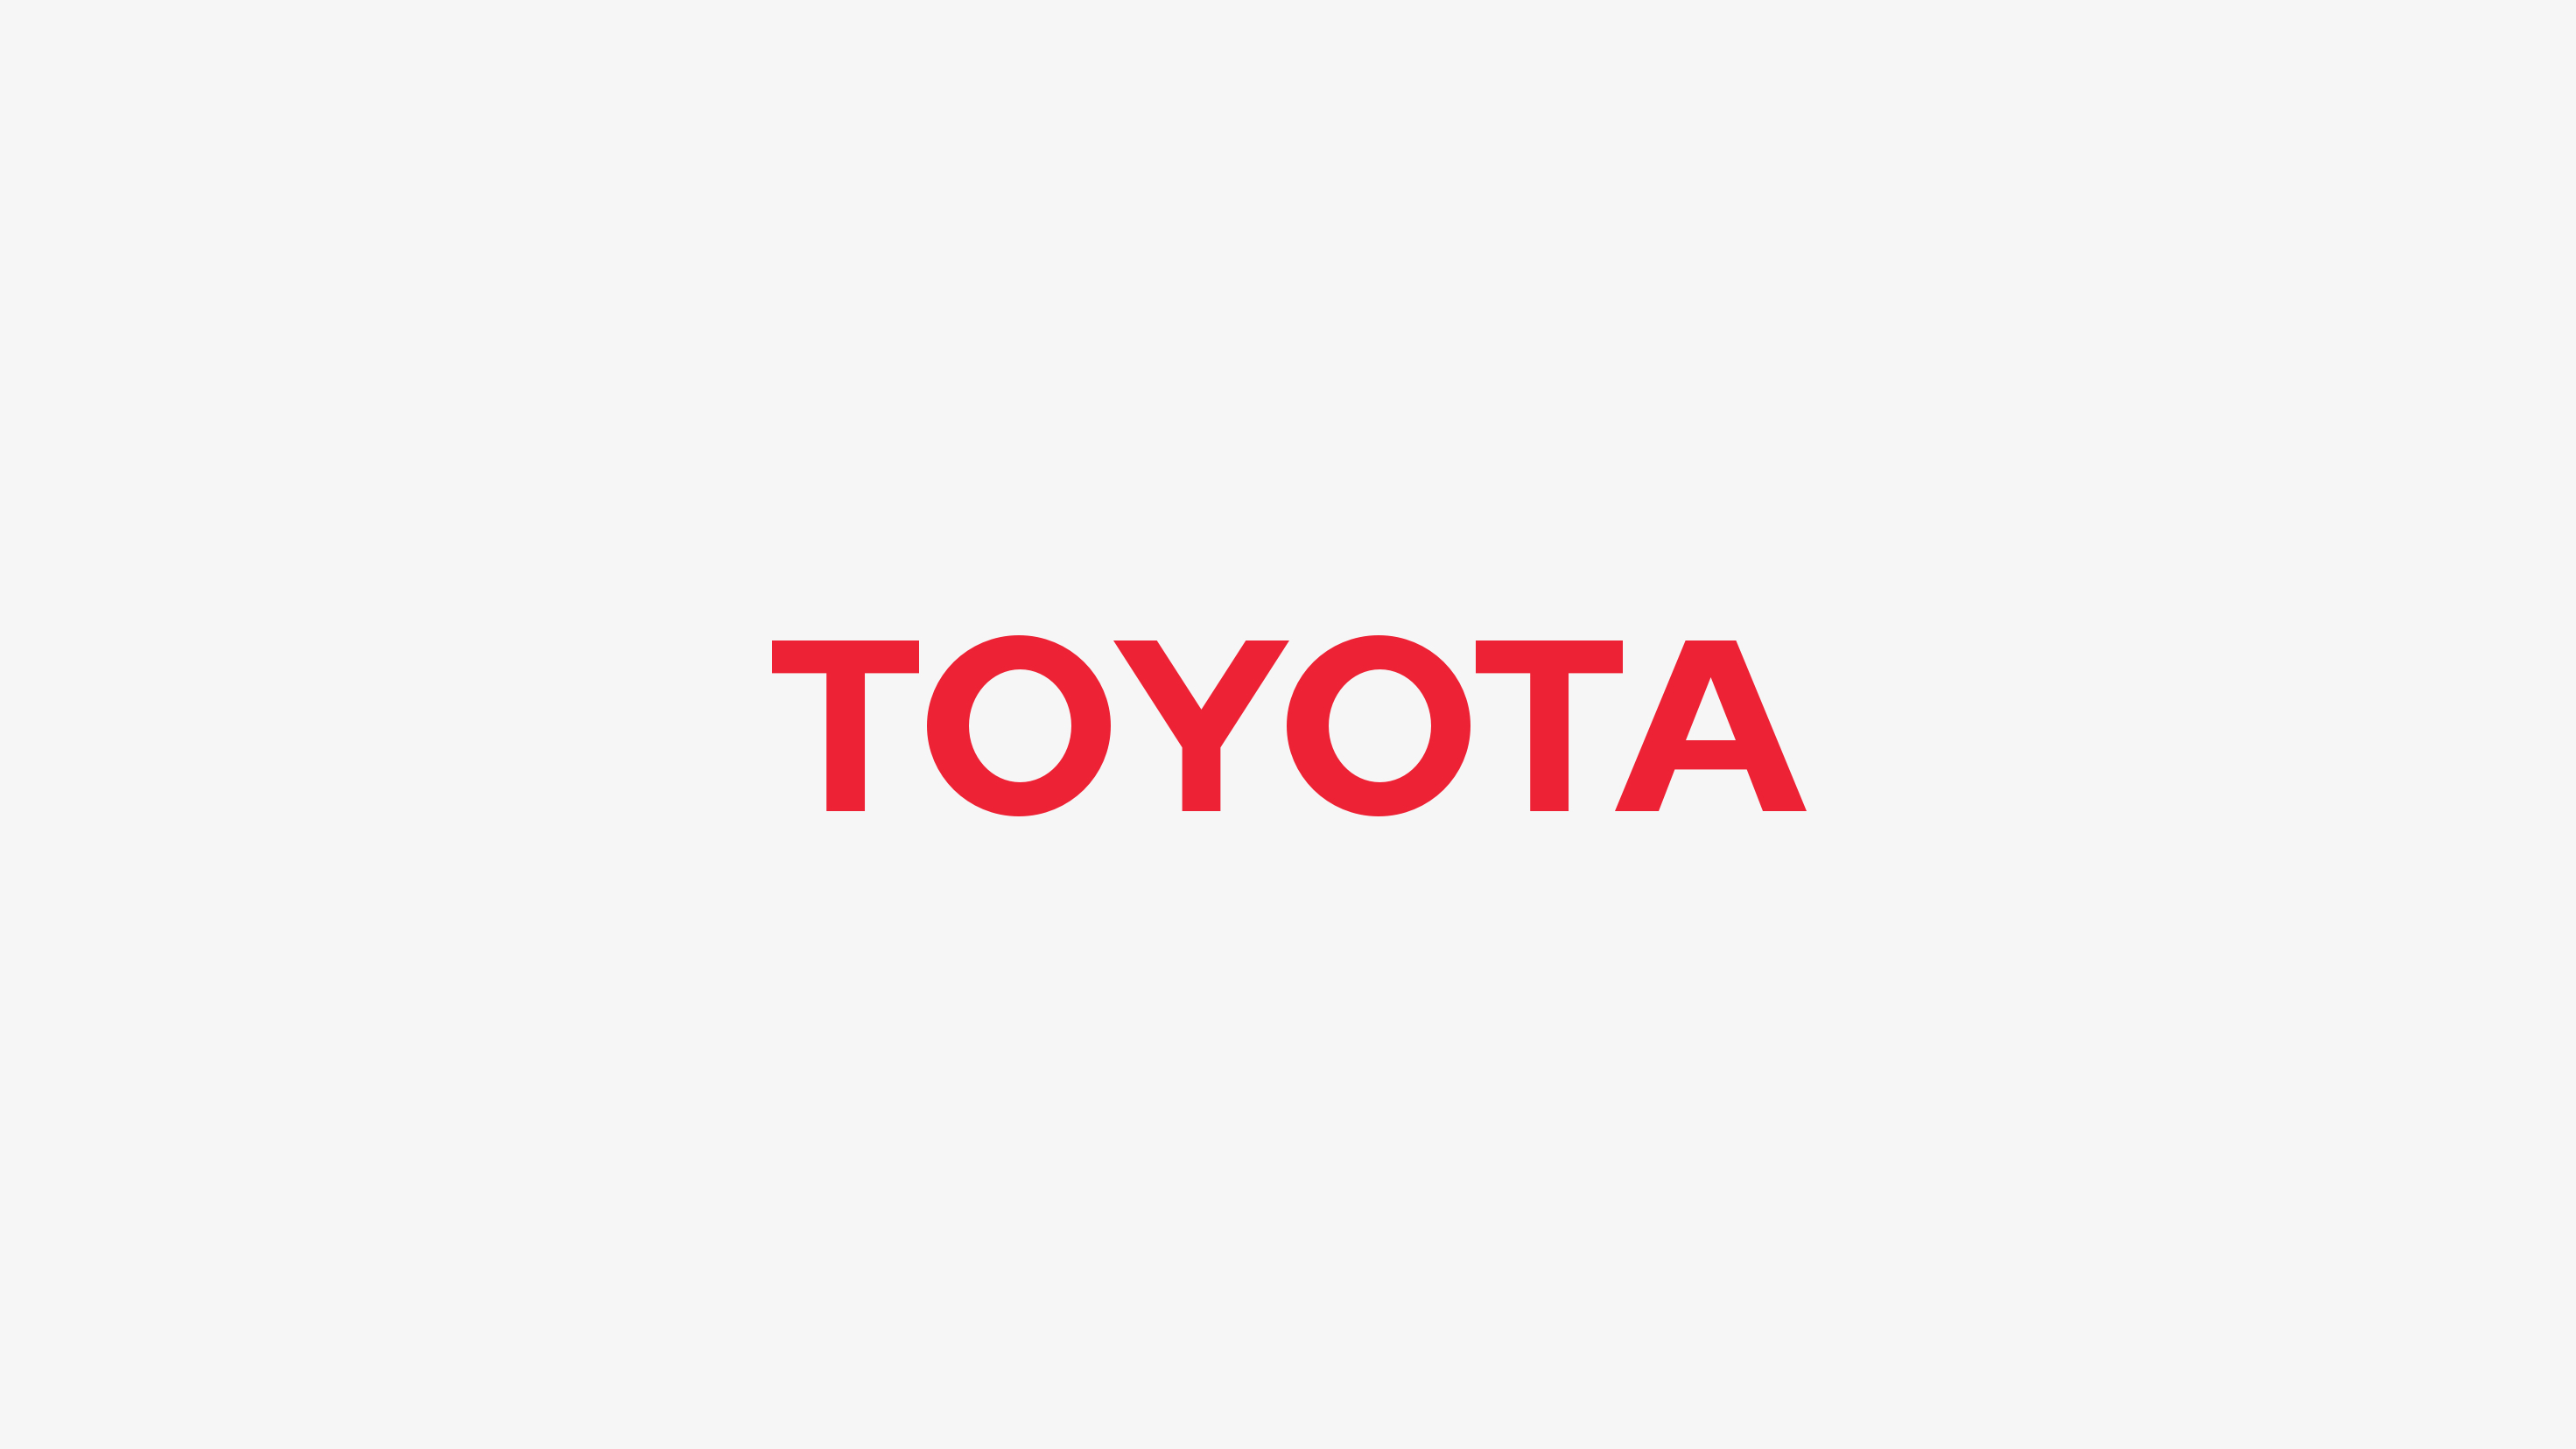 2015 Toyota/MIT/Stanford Collaborative Research Centers for Artificial Intelligence Research Announcement